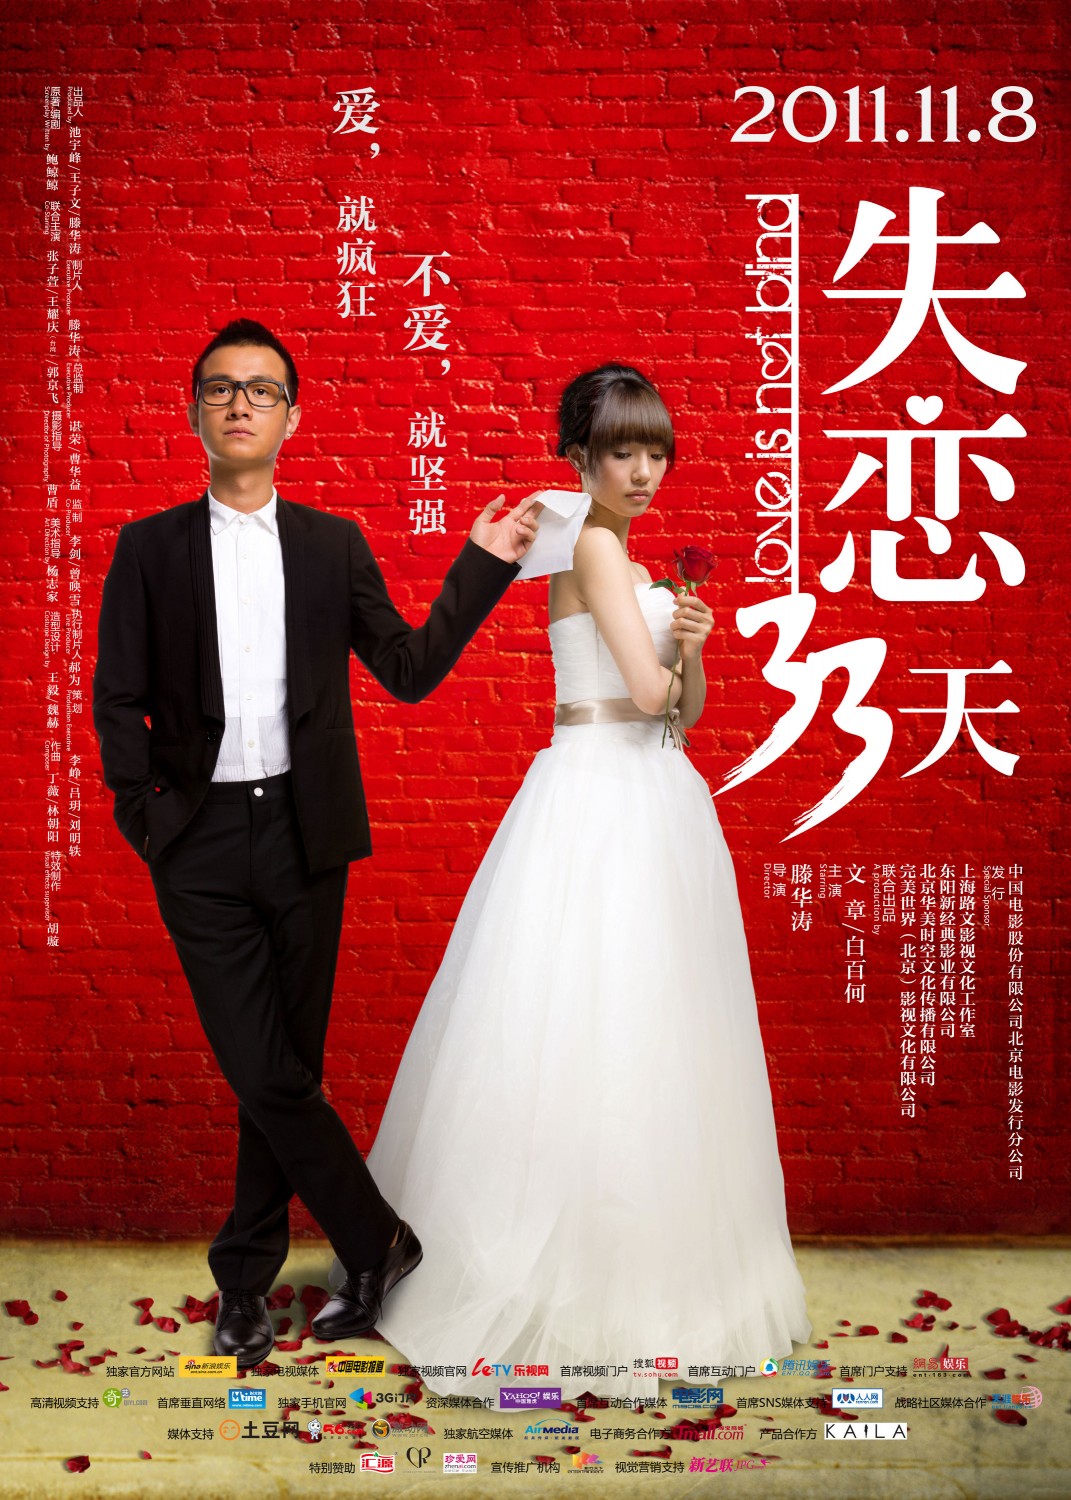 Extra Large Movie Poster Image for Love is Not Blind (#3 of 3)